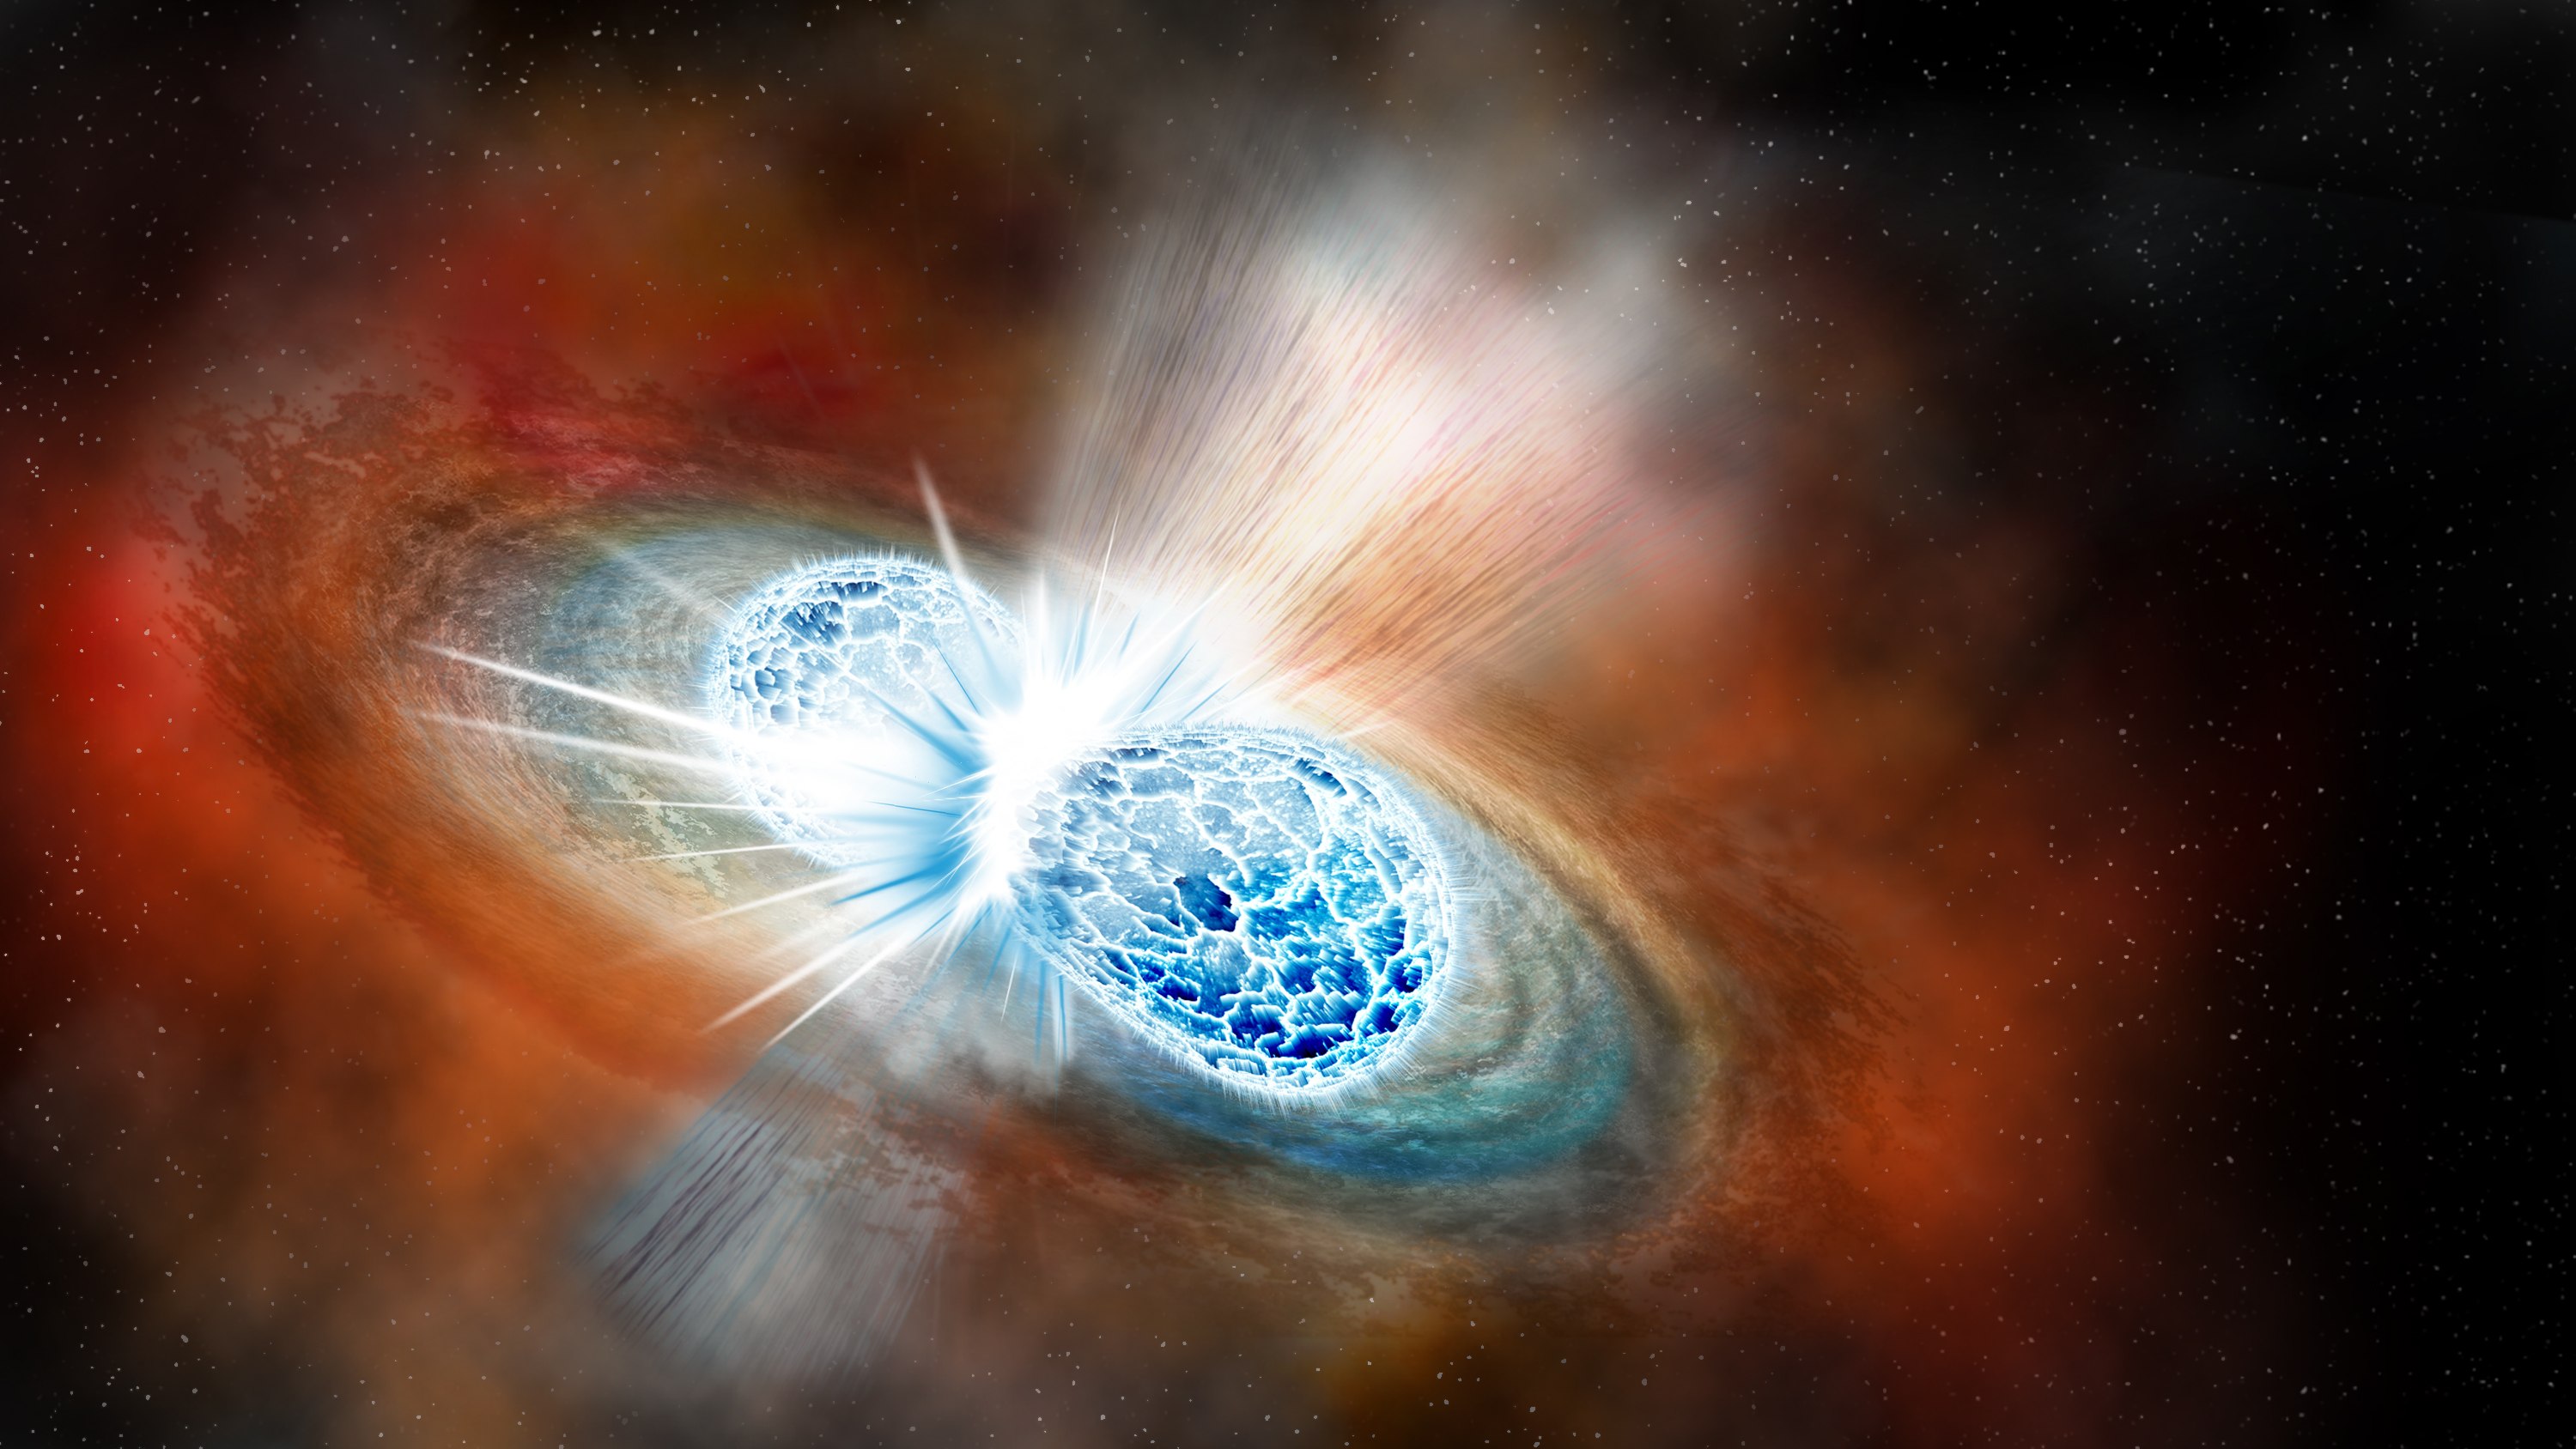 Artist's conception of two neutron stars merging. U of A researchers have developed a faster, simpler way to model the stellar collisions to help scientists predict where to aim telescopes to observe them. (Illustration: Robin Dienel, courtesy of the Carnegie Institution for Science)